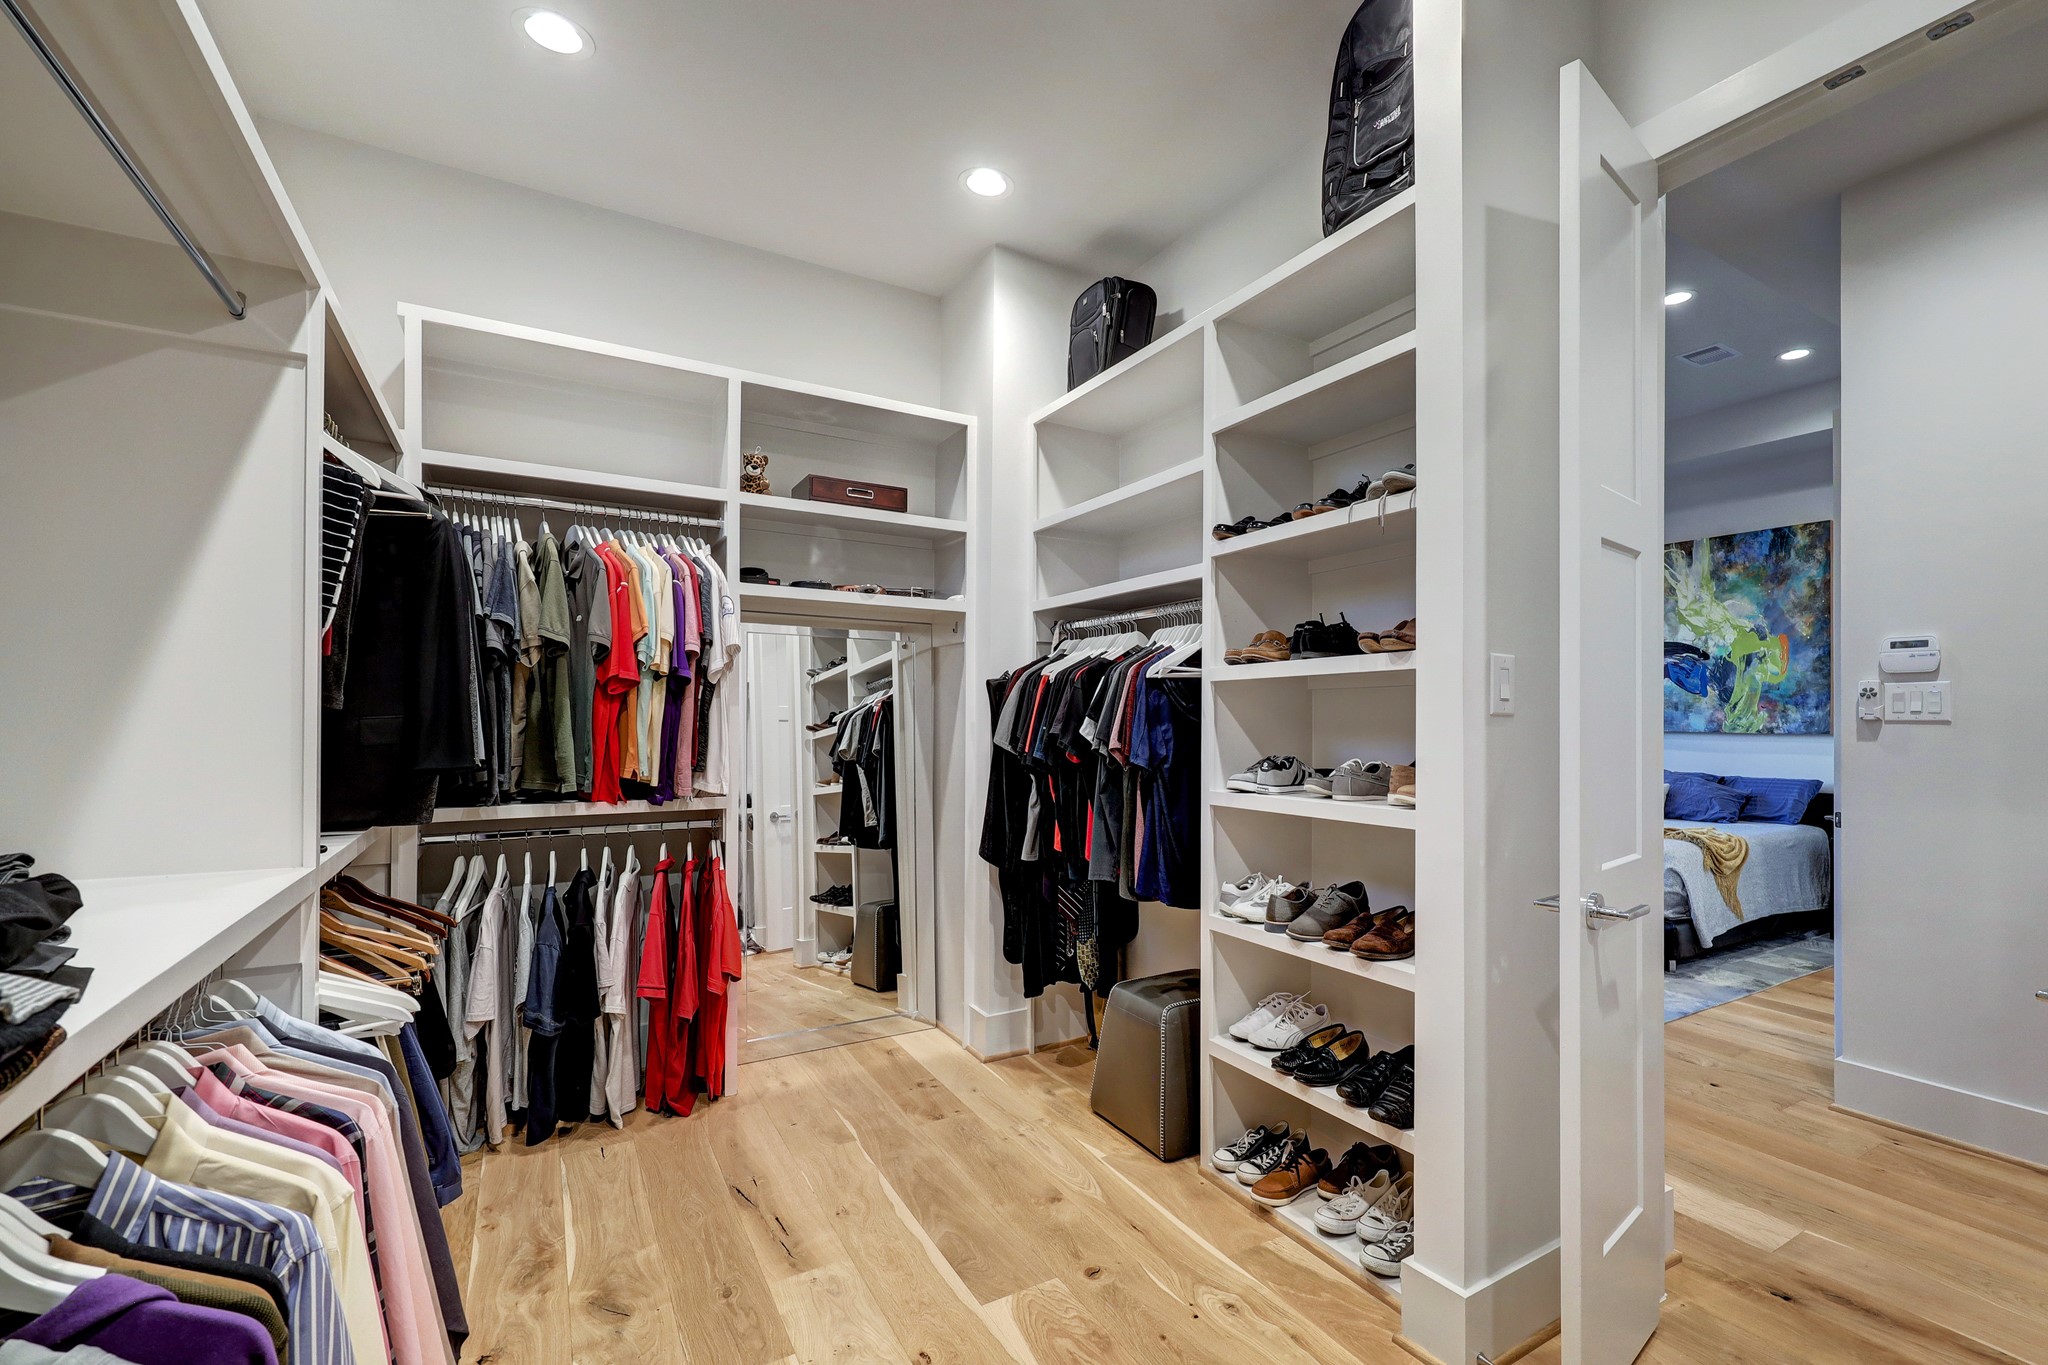 A palatial custom closet tames even the most extensive wardrobes in the beautiful owner's suite.